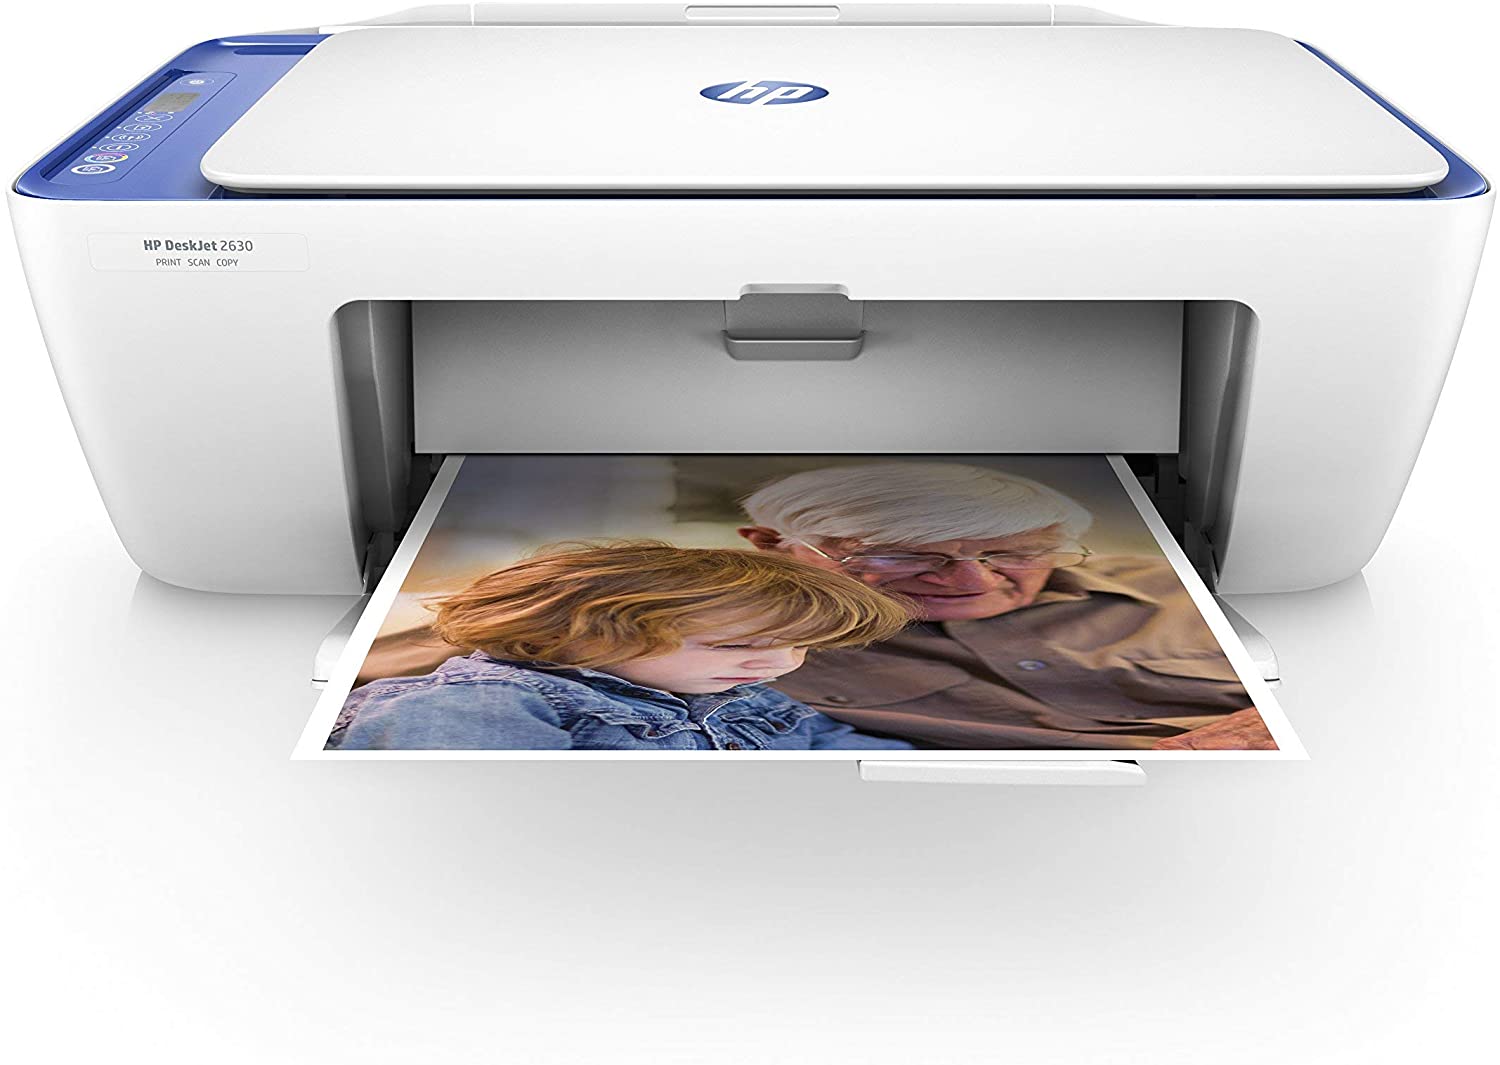  HP Deskjet 2630 All-in-One Printer, Instant Ink with 2 Months Trial uk reviews